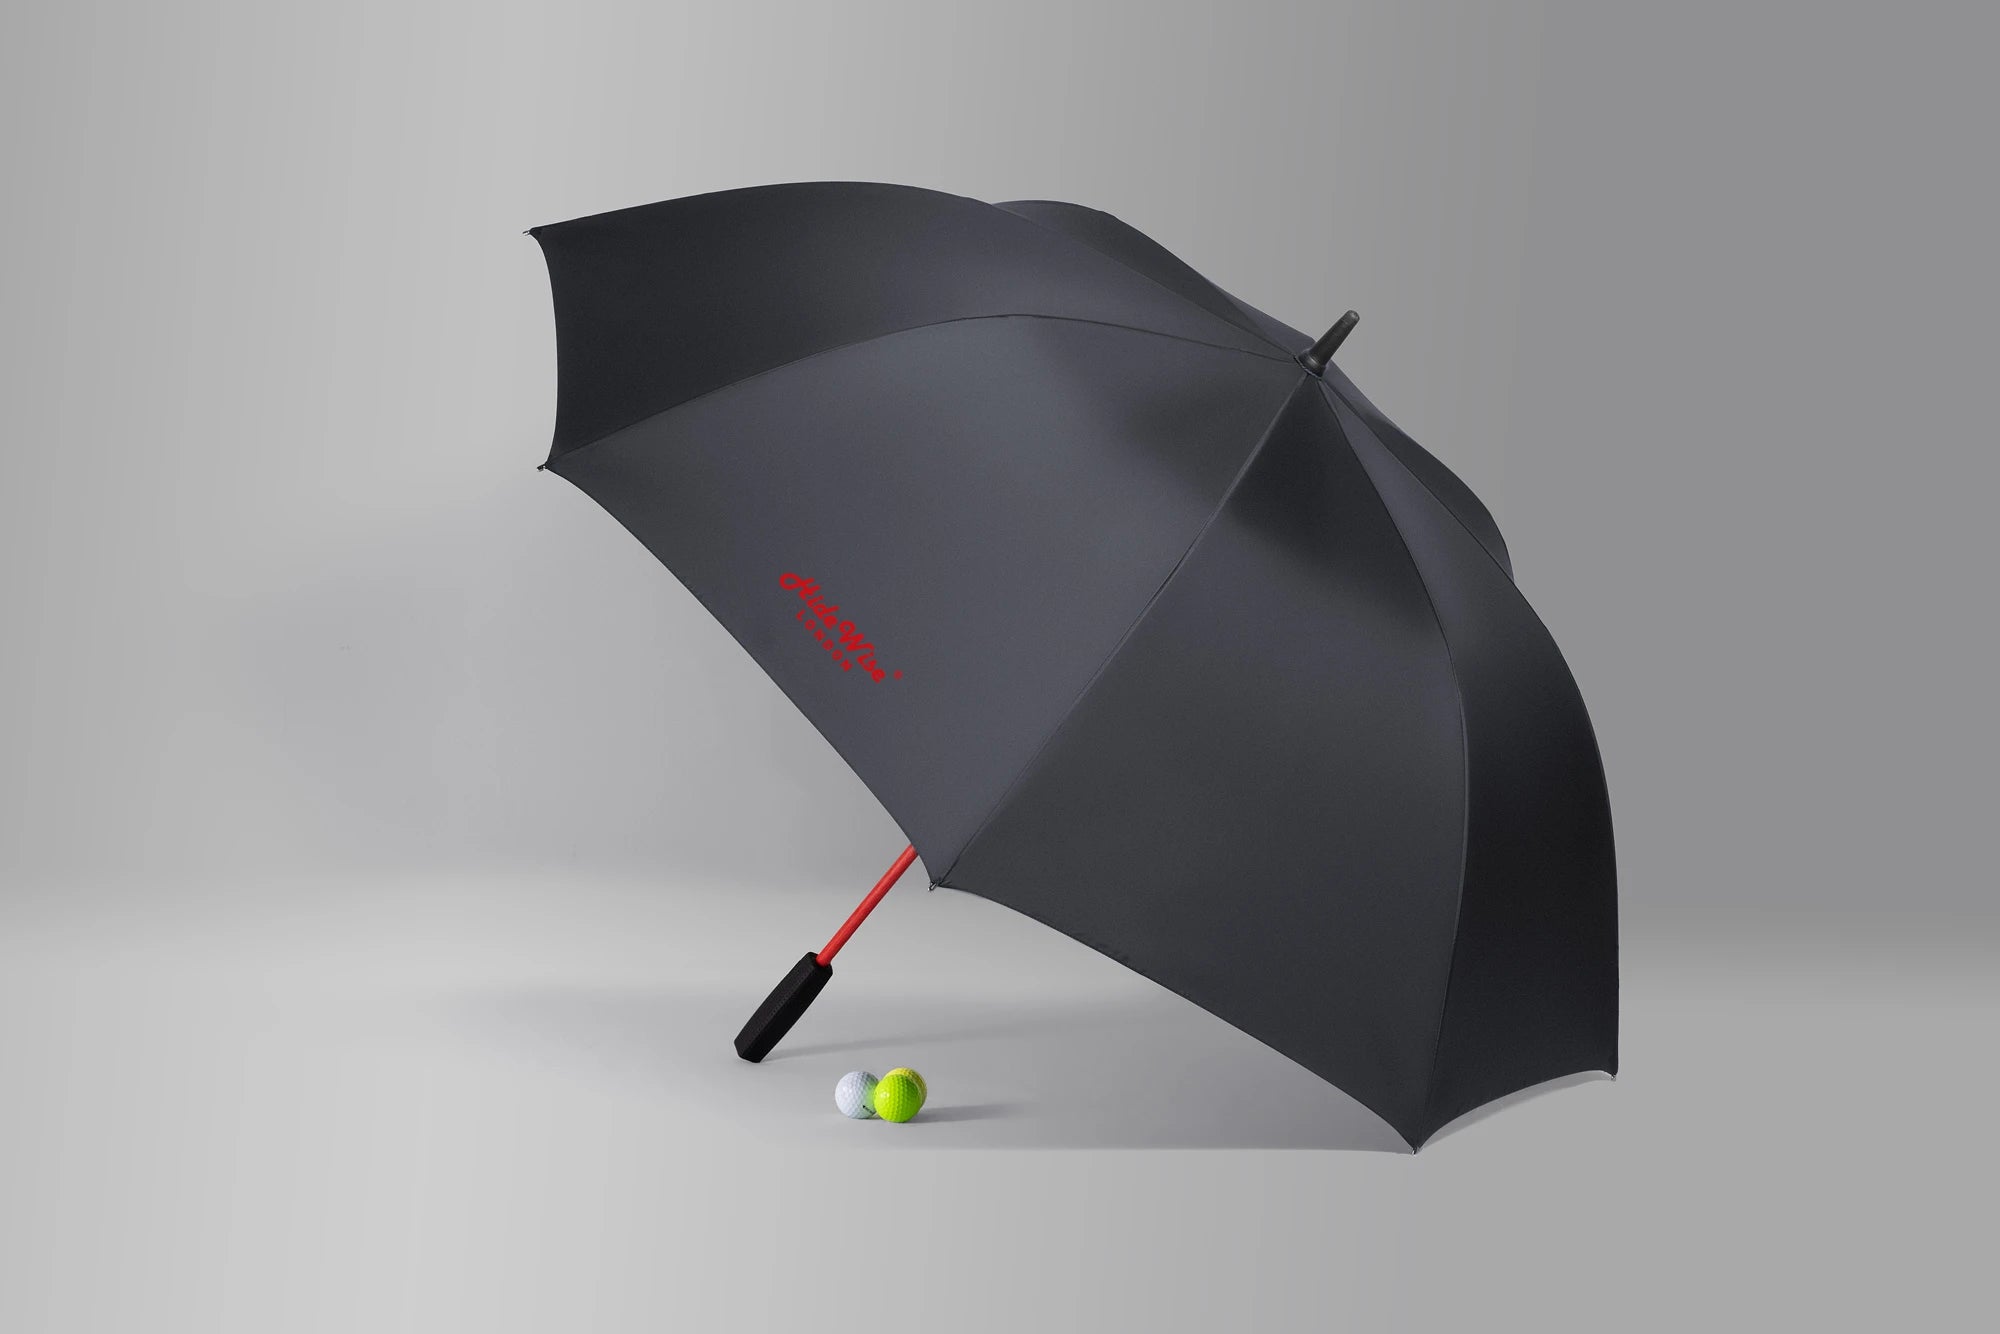 Hidewise-london-golf-umbrella-gift-strong-sturdy-wind-proof-gust-proof-grey-gray-red-brolly